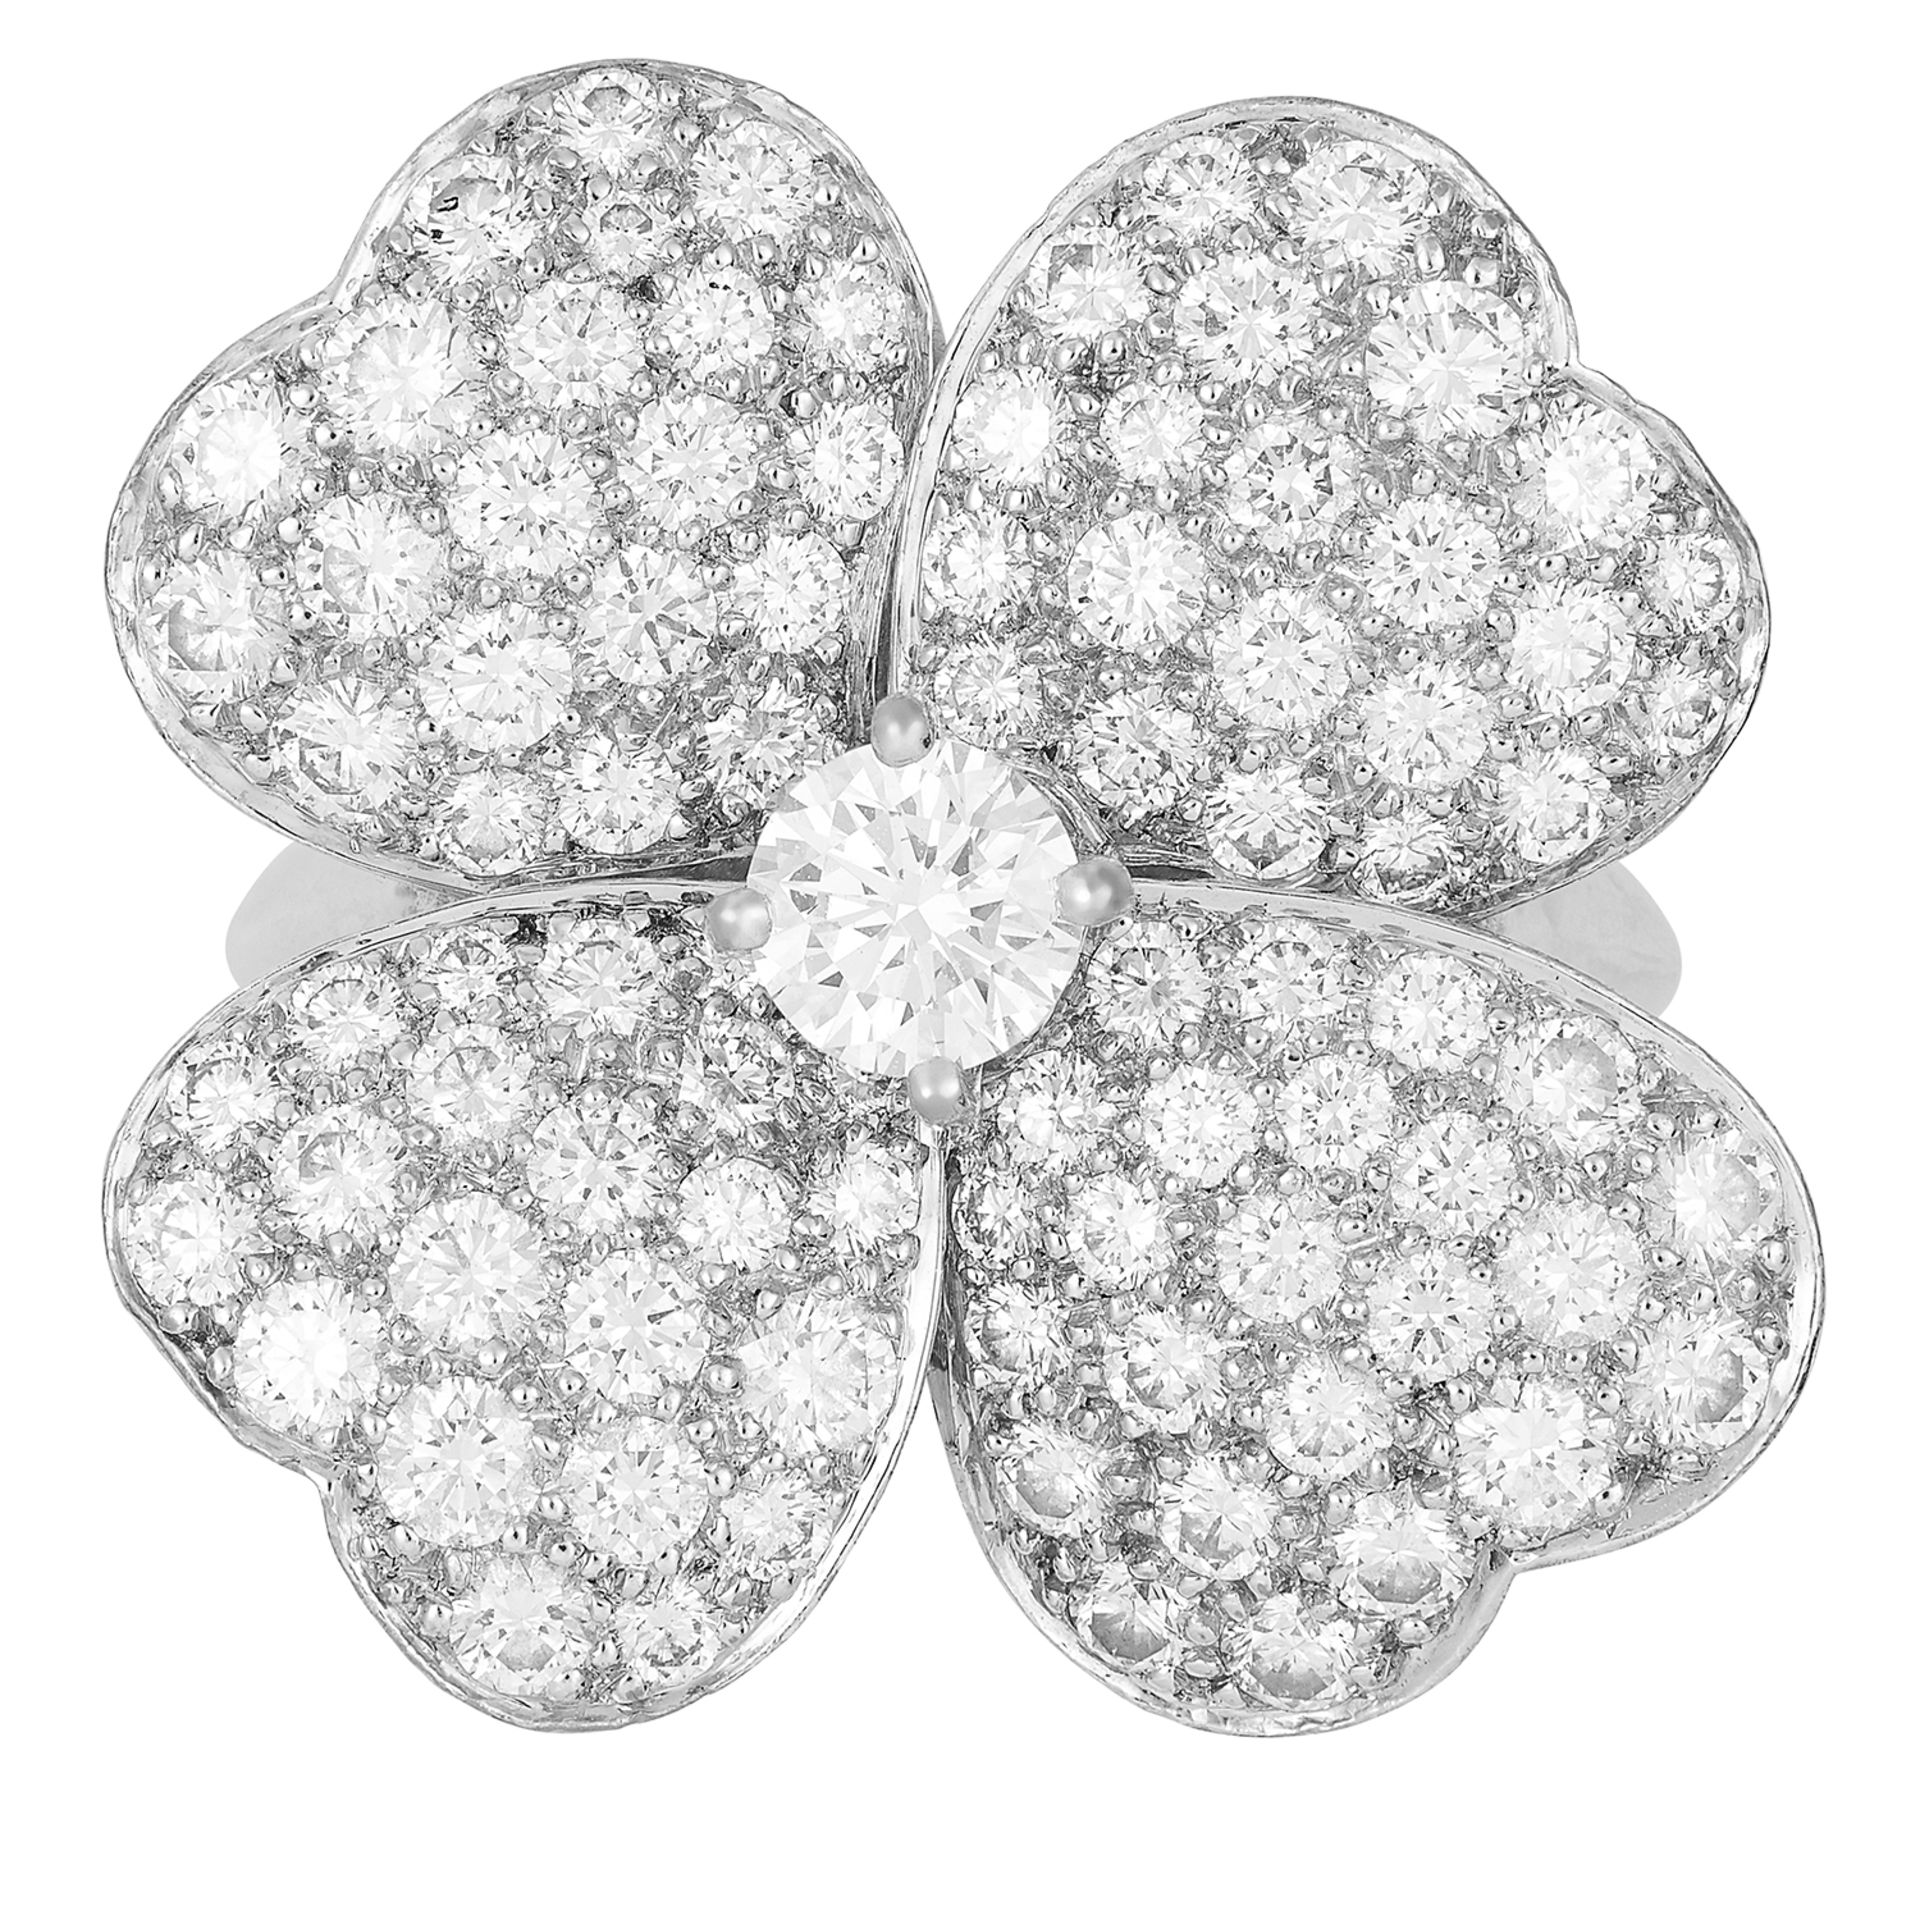 COSMOS DIAMOND RING, VAN CLEEF AND ARPELS depicting a flower set with round cut diamonds totalling